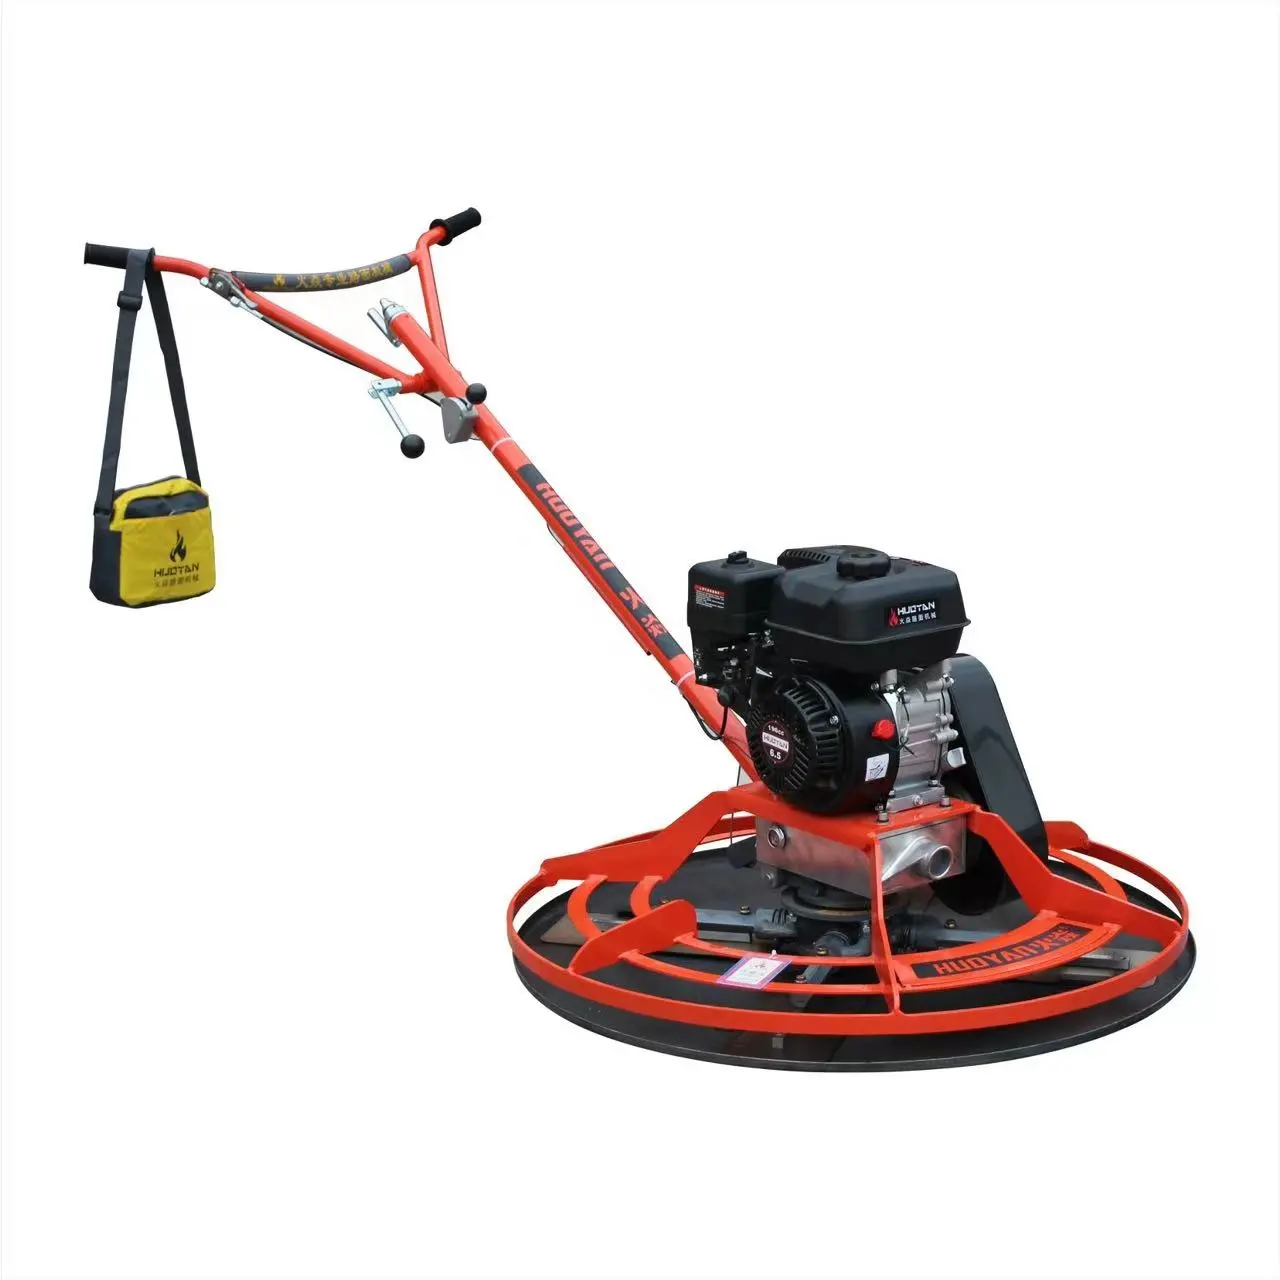 Concrete Power Shovel Makes The Road Surface Smooth Cement Leveling Machine Power Trowel